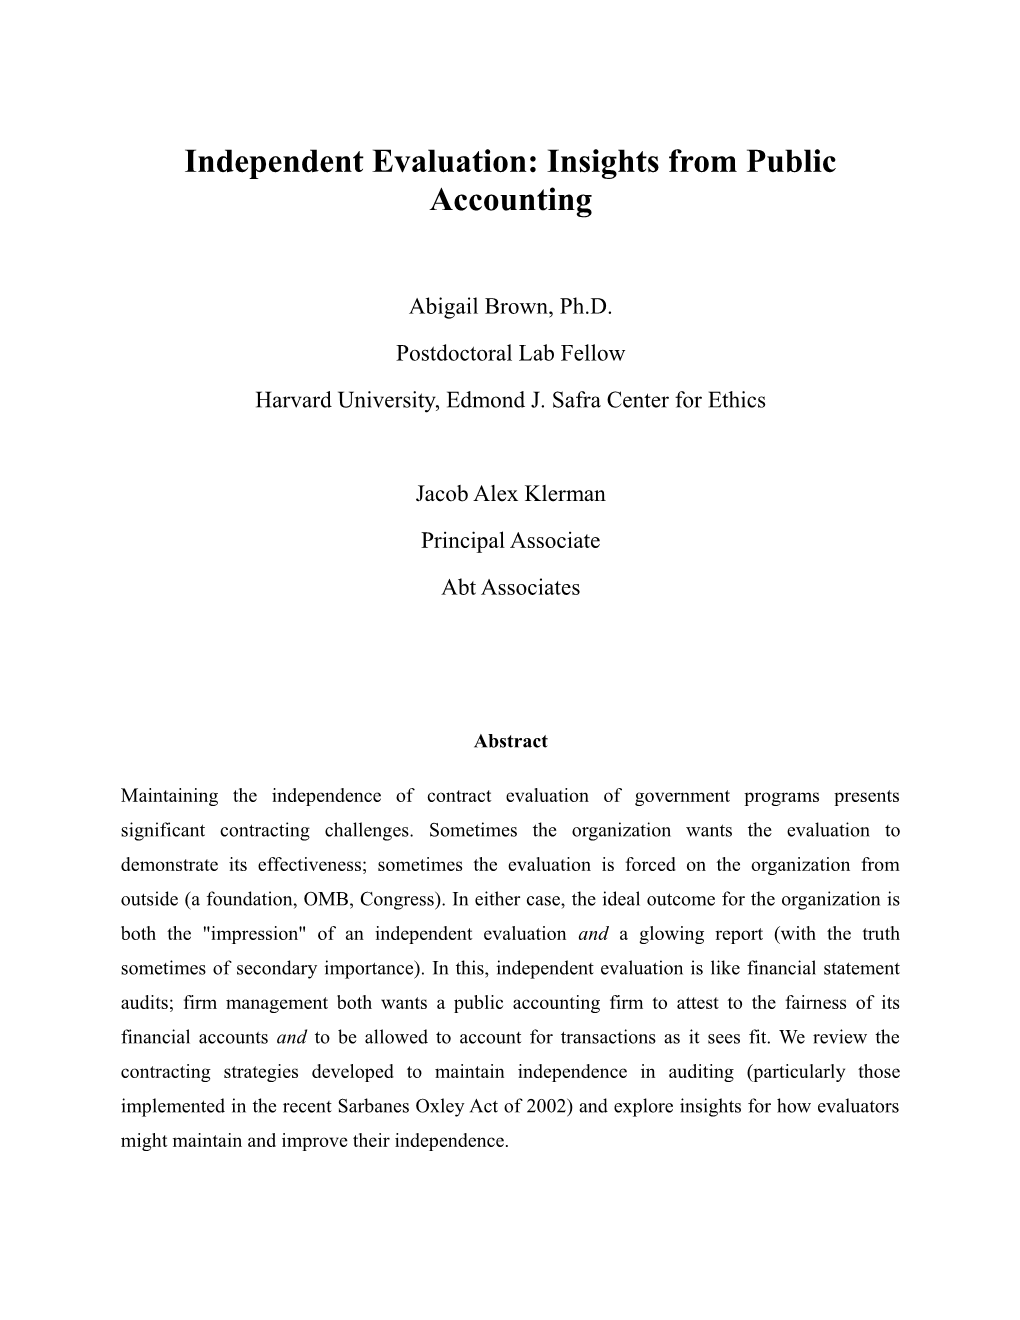 Independent Evaluation: Insights from Public Accounting